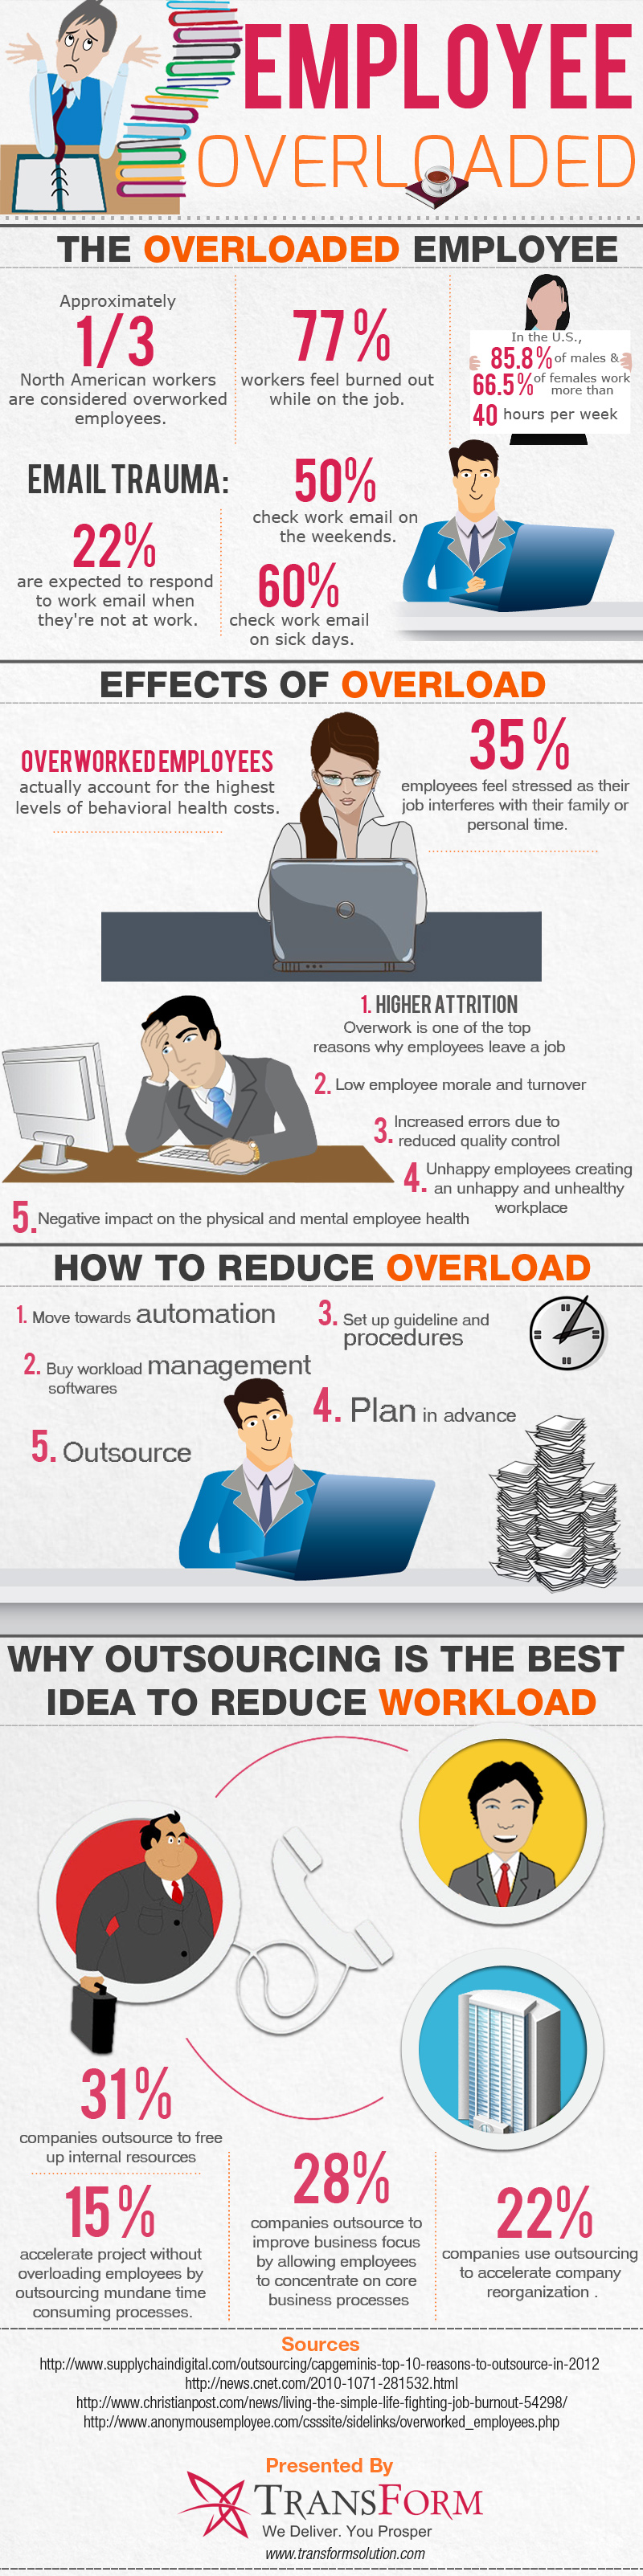 reduce employee burnout infographic